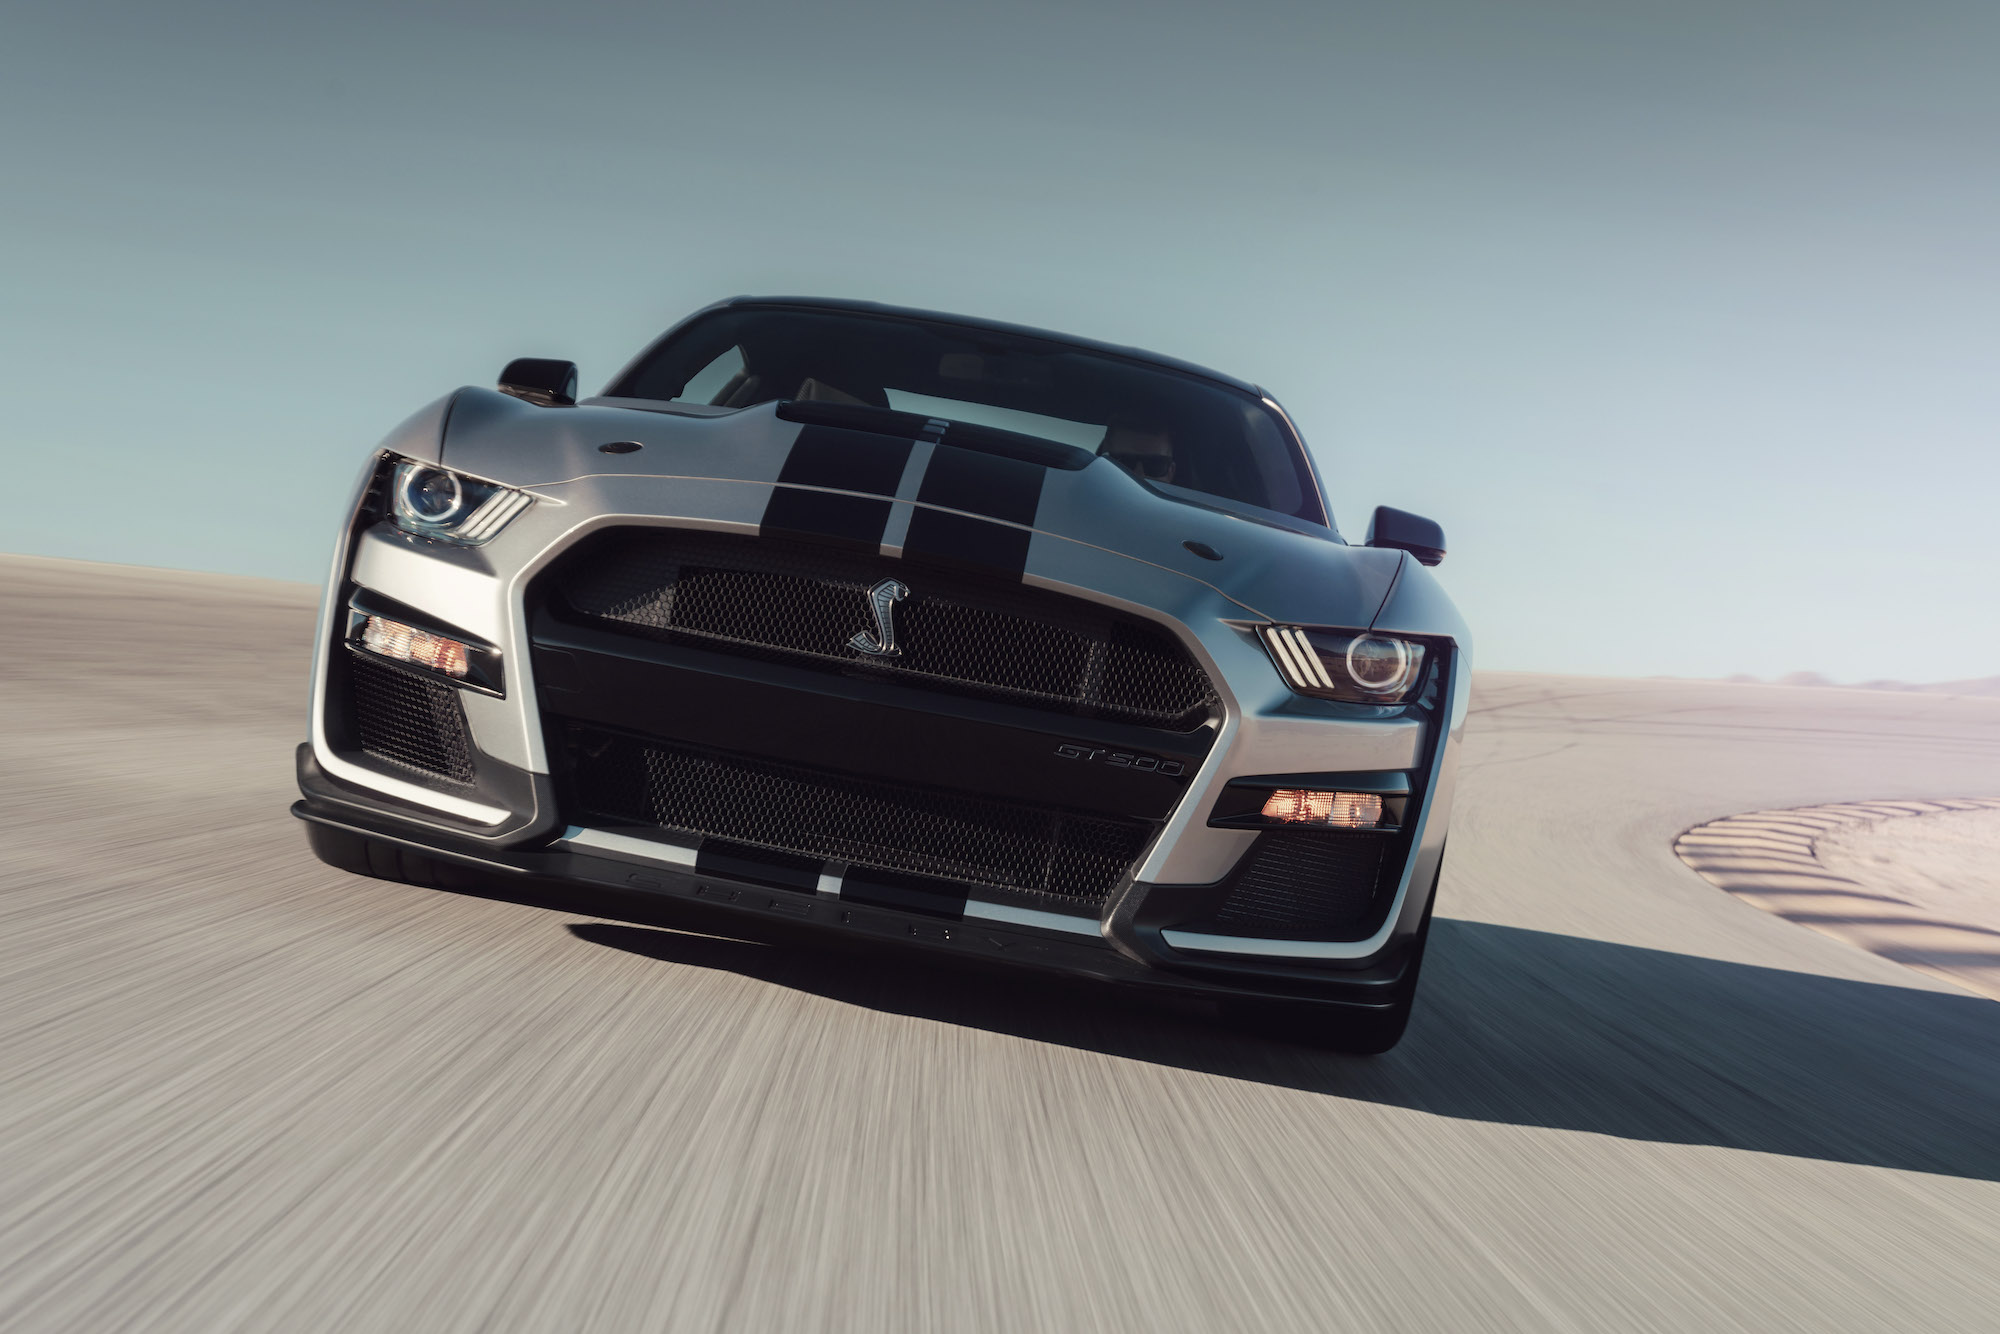 A 2020 Ford Mustang Shelby GT500 with a silver paint job and black racing stripes drives on a racetrack in the desert